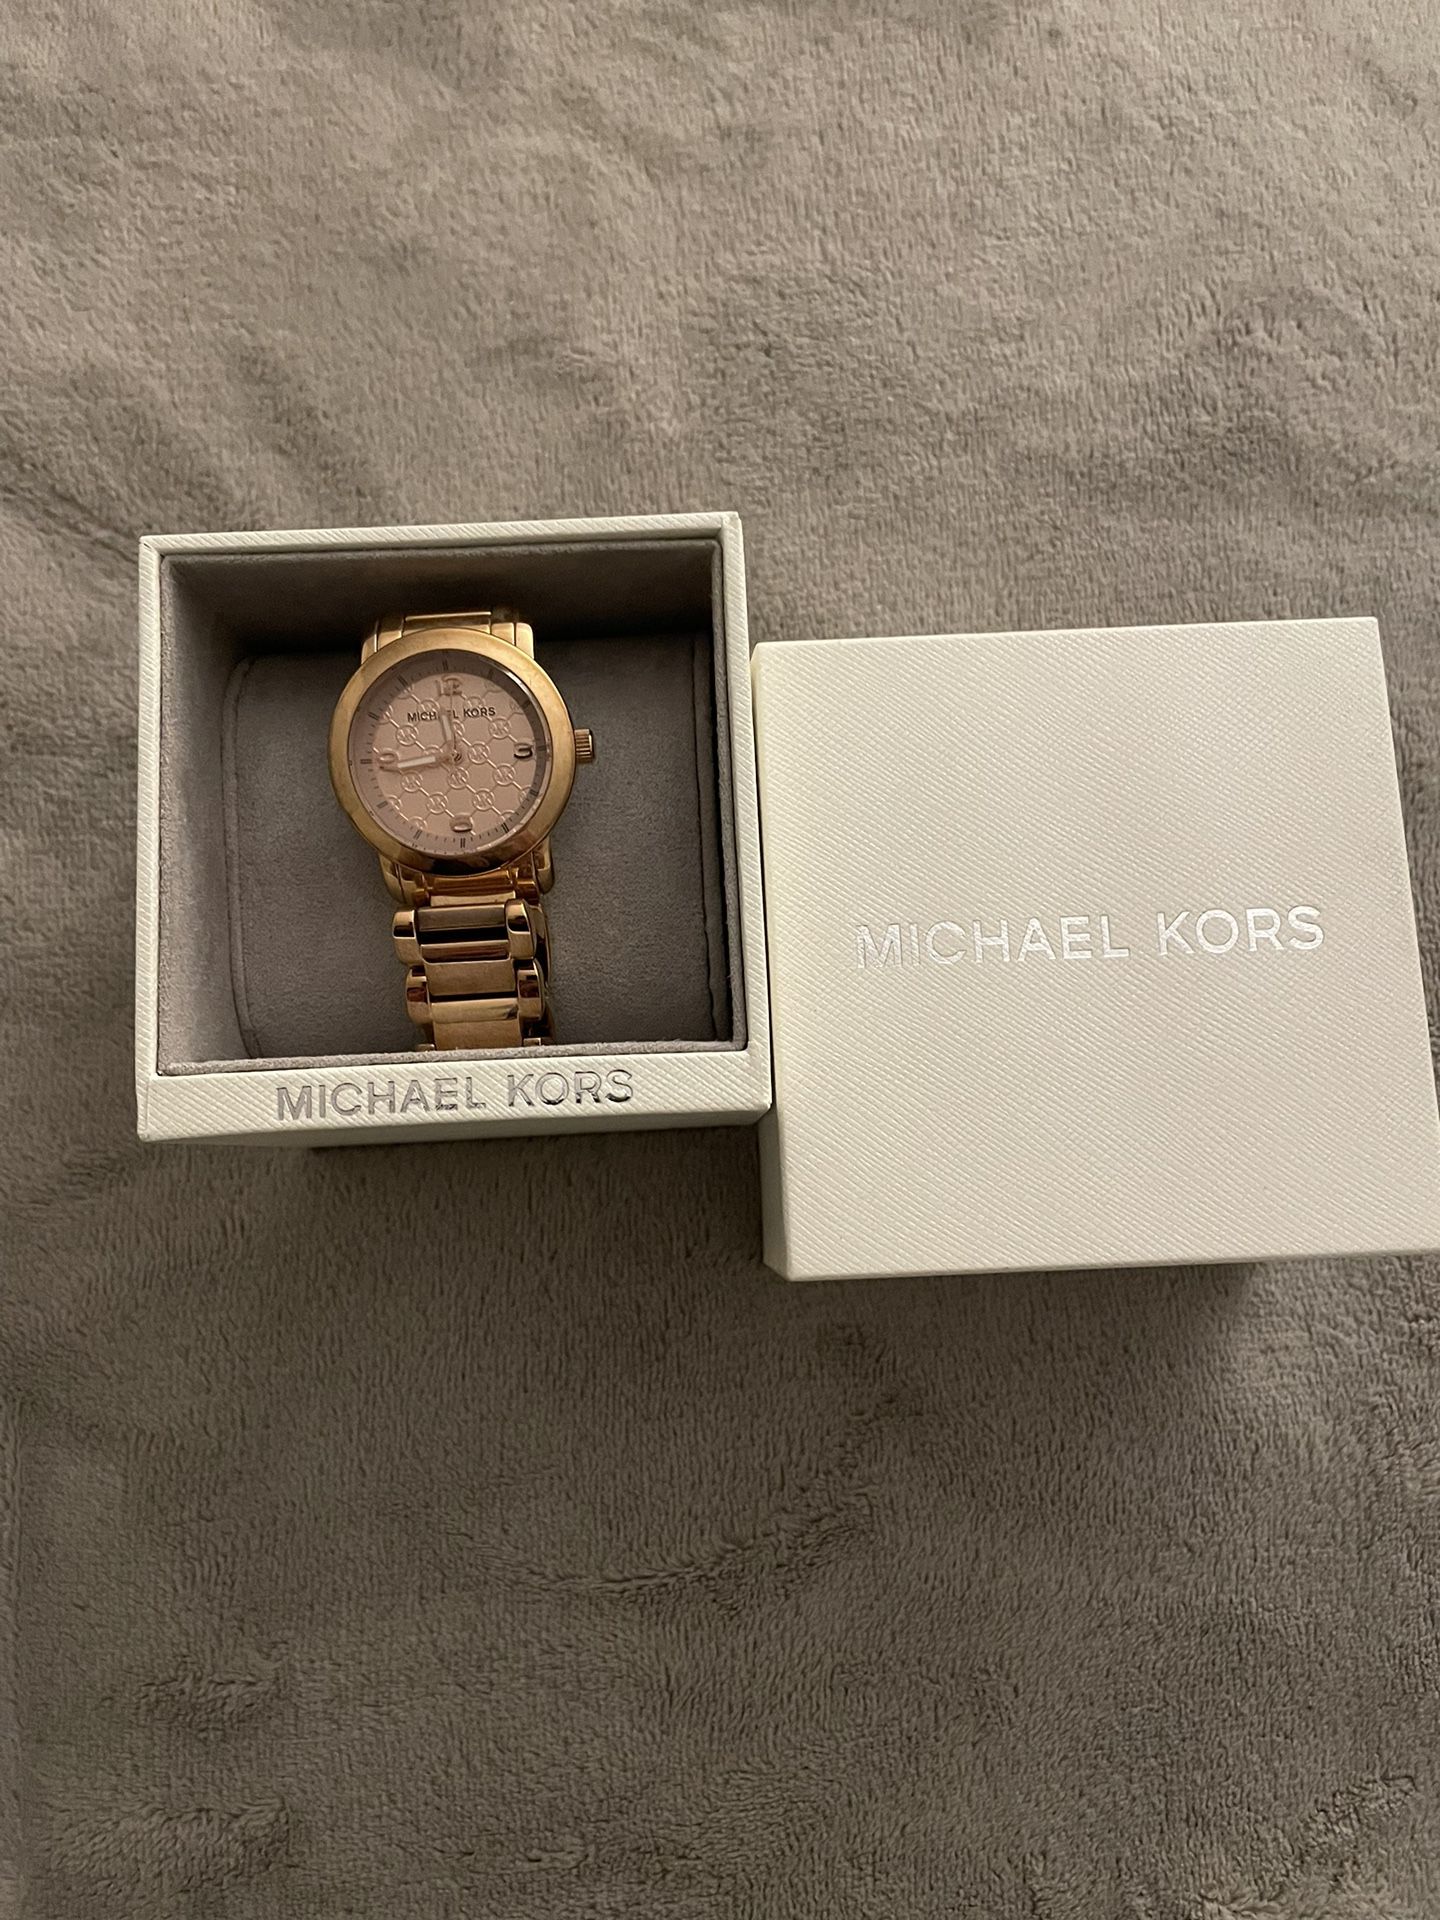 Michael Kors Watch for Sale in Albuquerque, NM - OfferUp